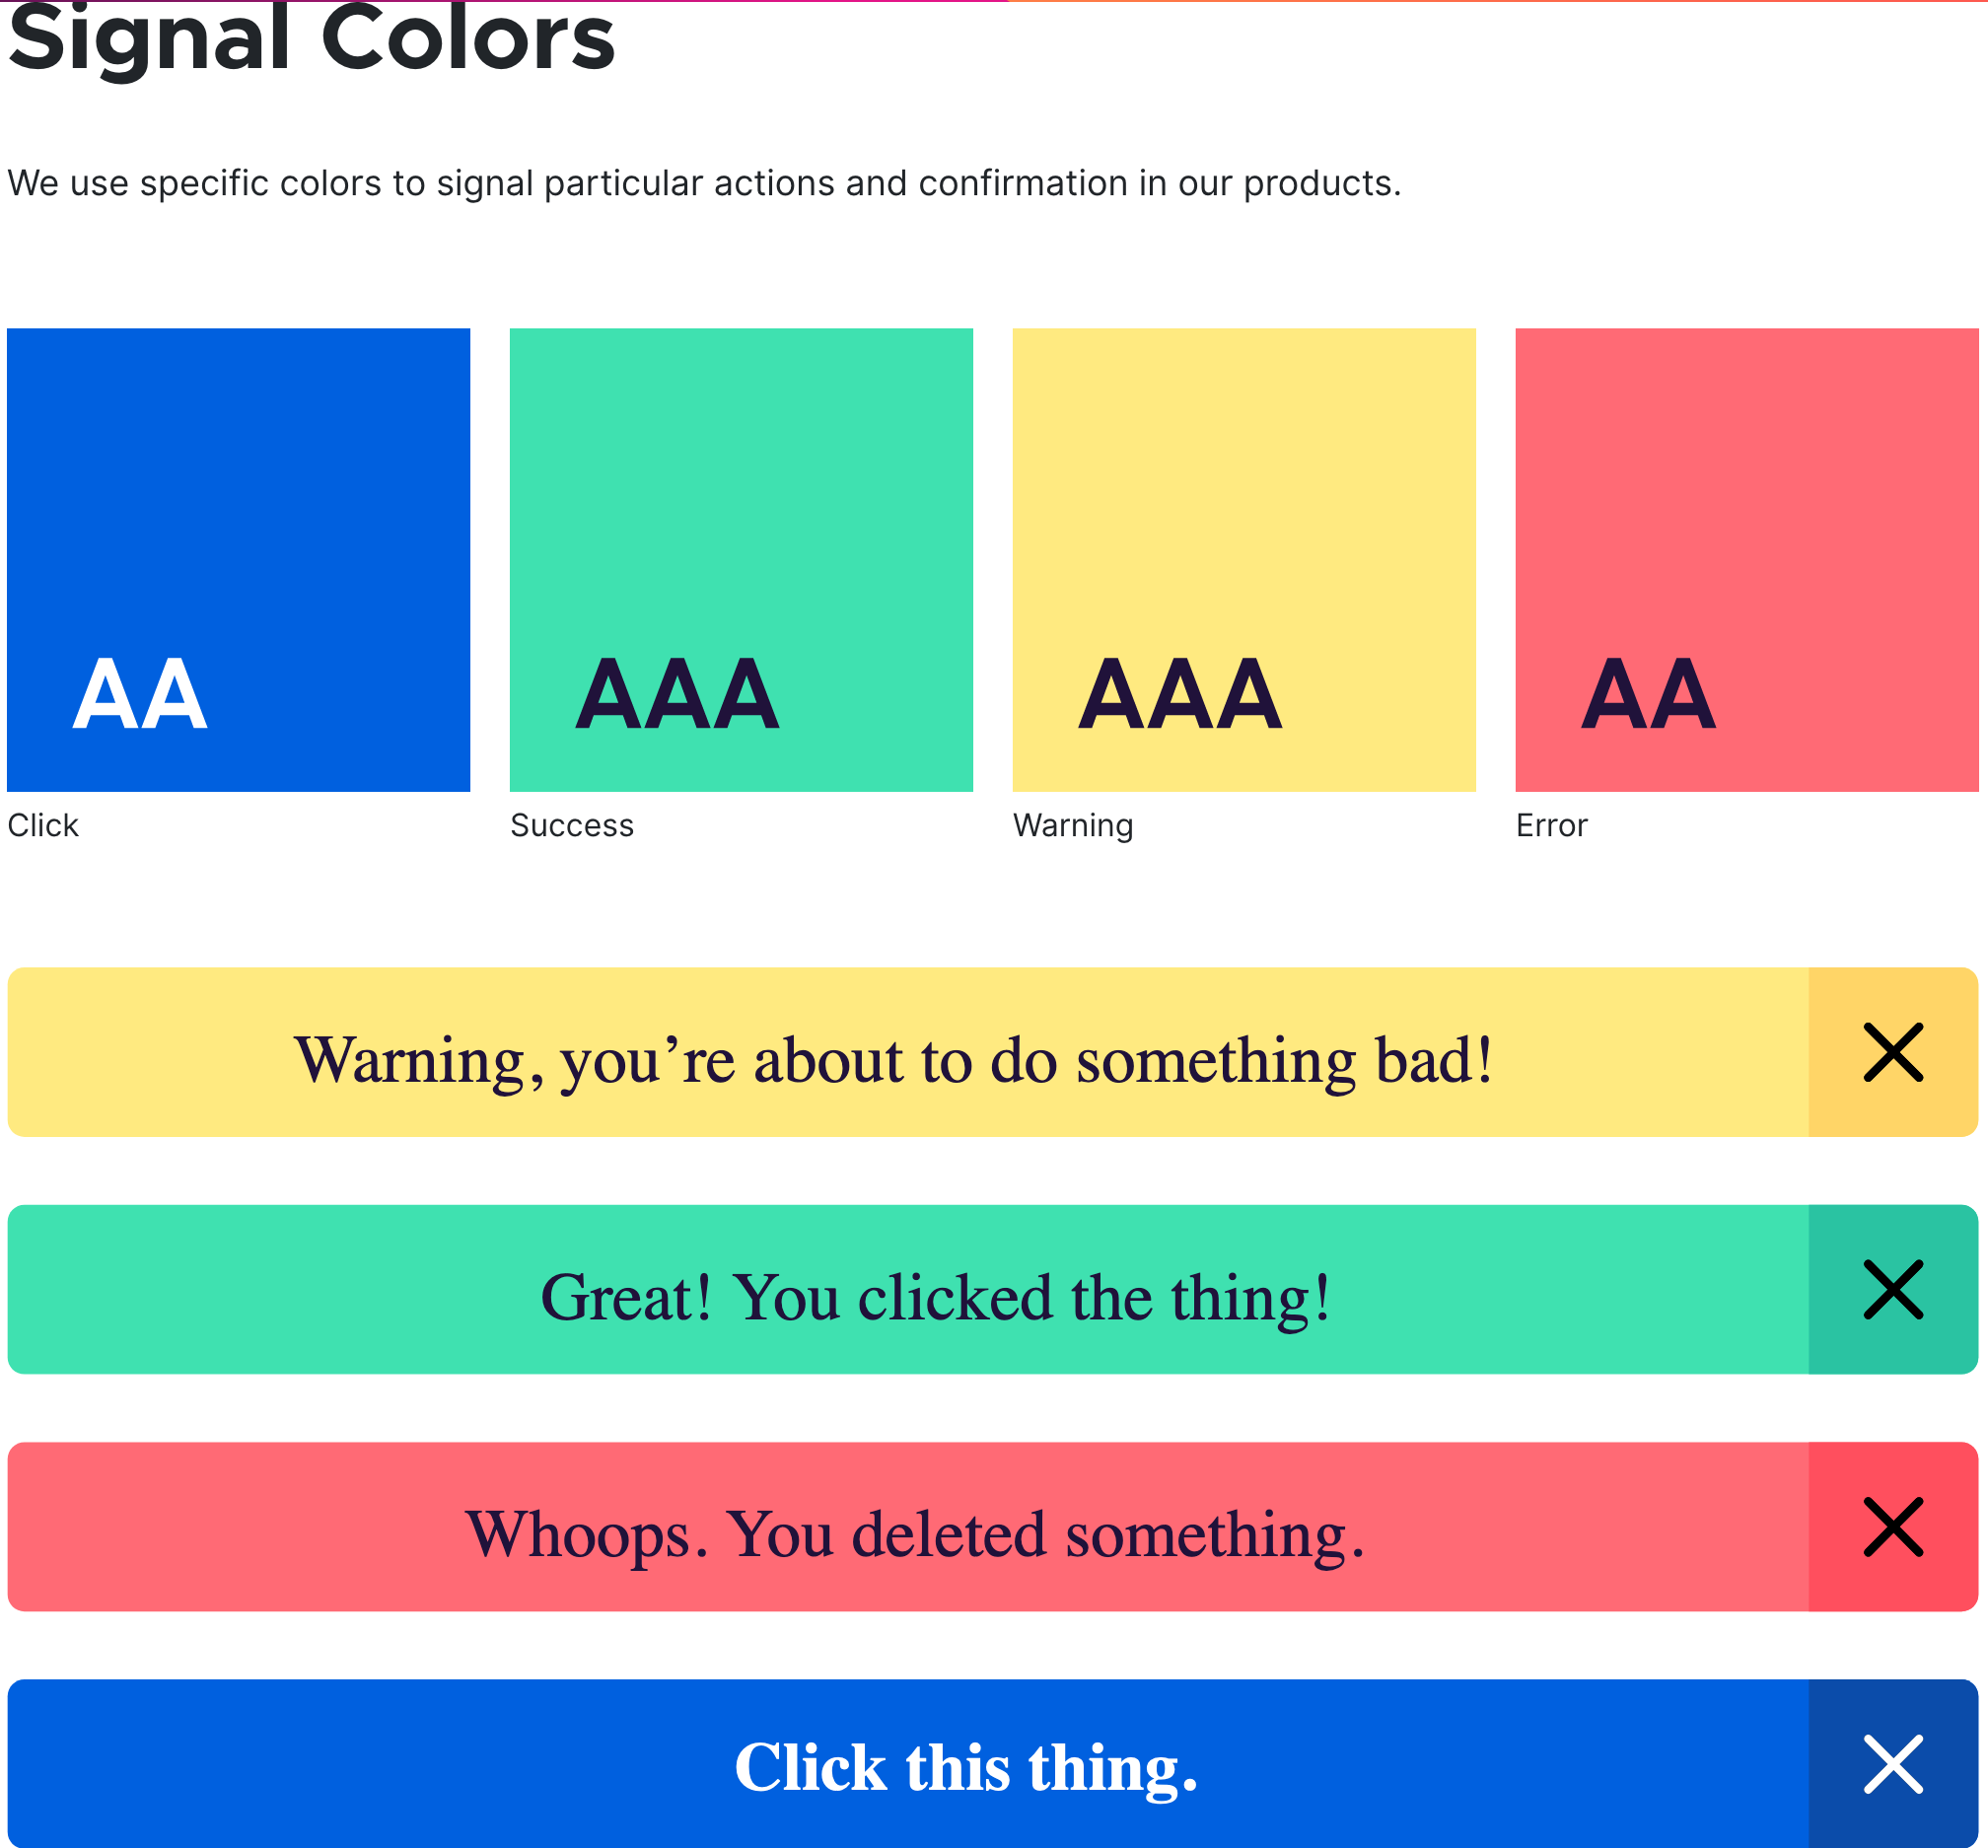 Firefox signal colors from their online style guide